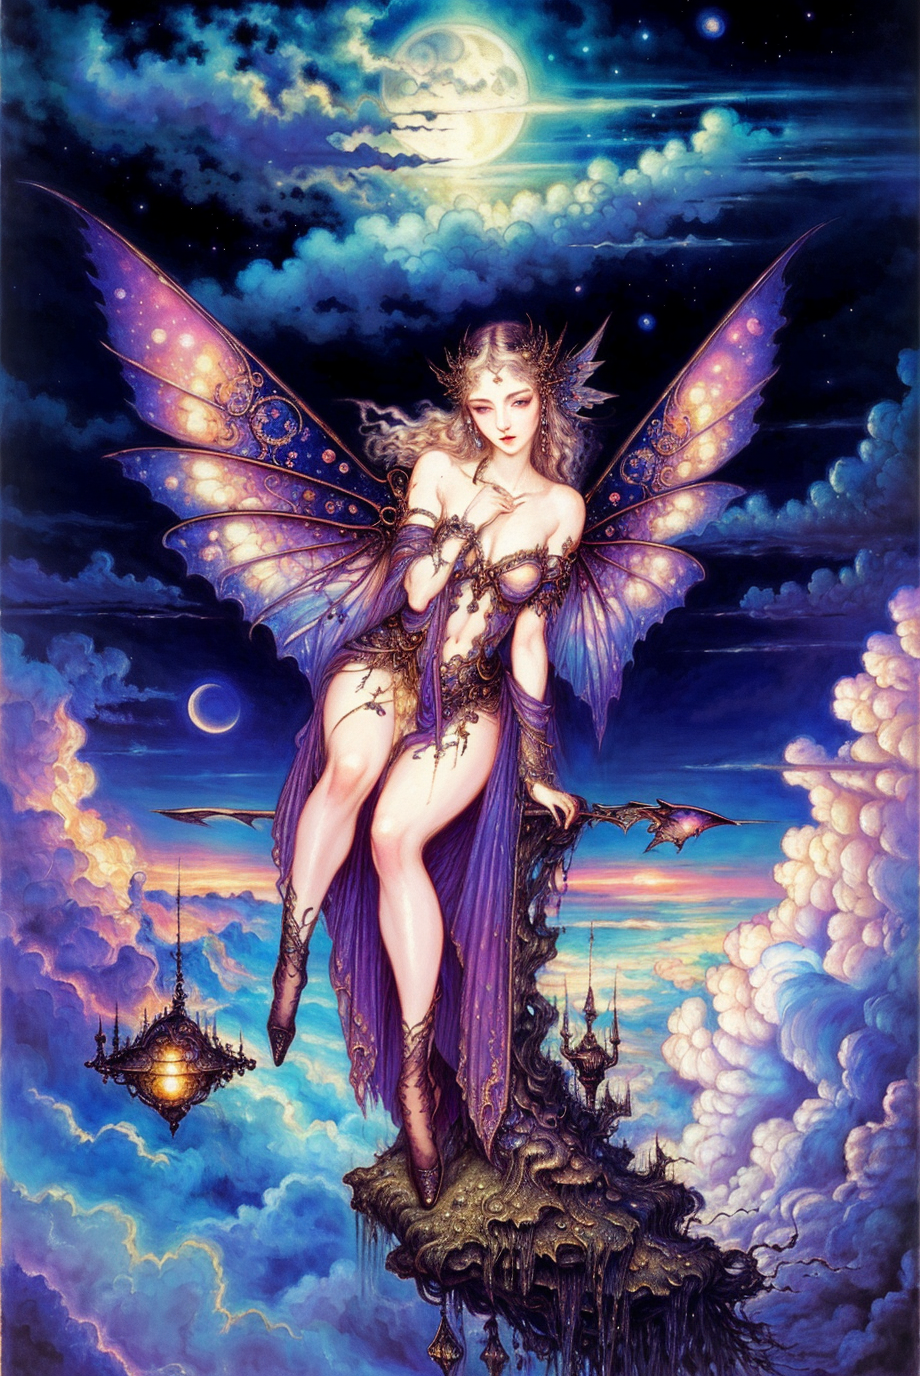 A Fantasy Artwork of a Female Fairy with Purple Wings and a Blue Dress.